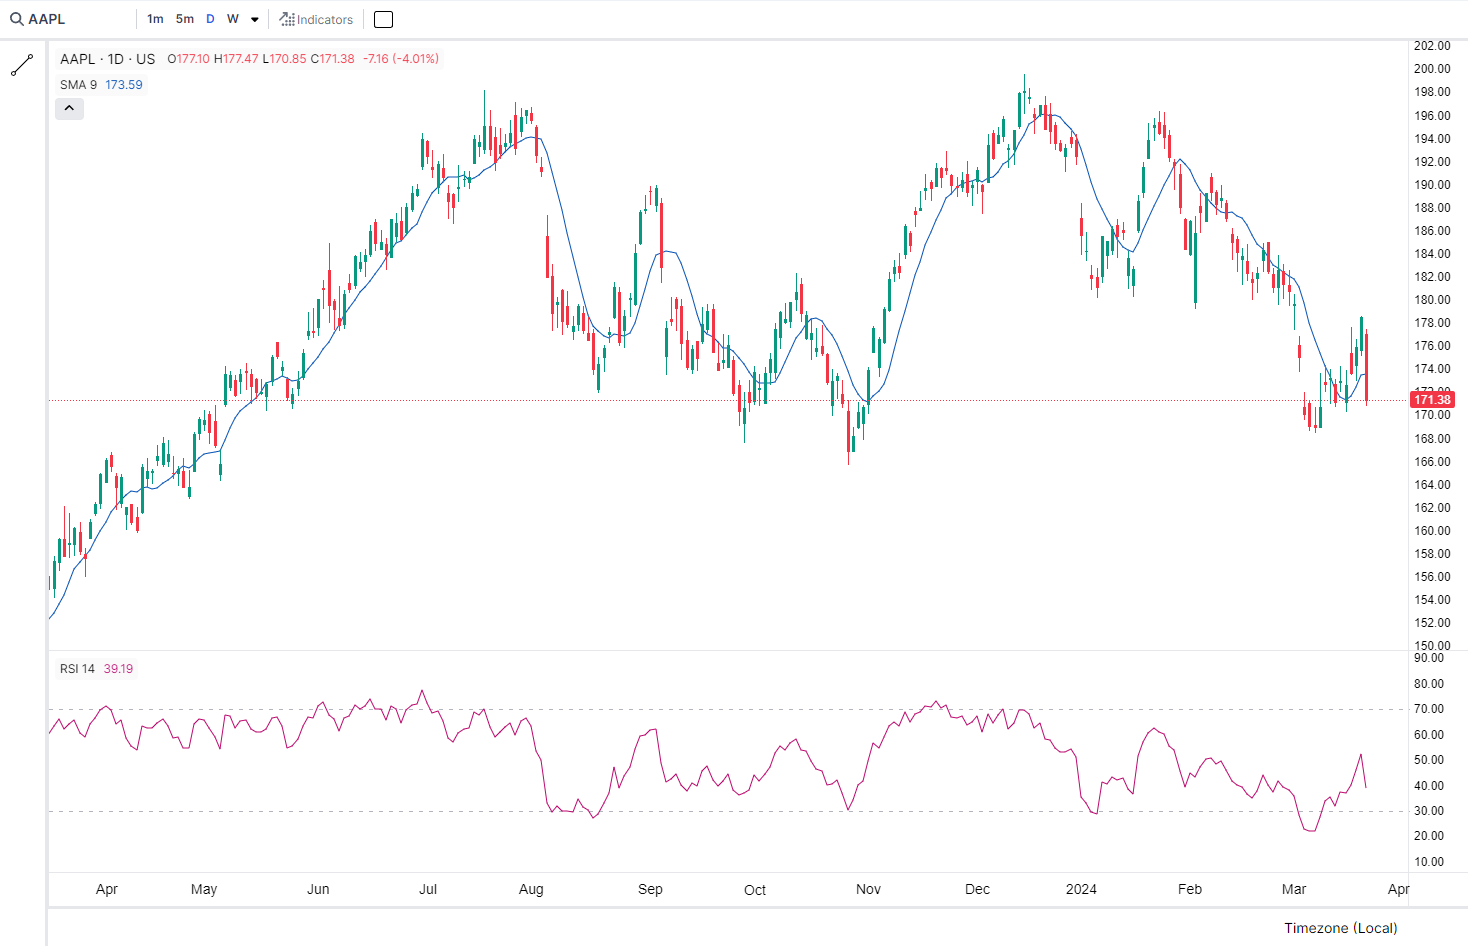 The last year of stock data on a candlestick chart with RSI and SMA indicators